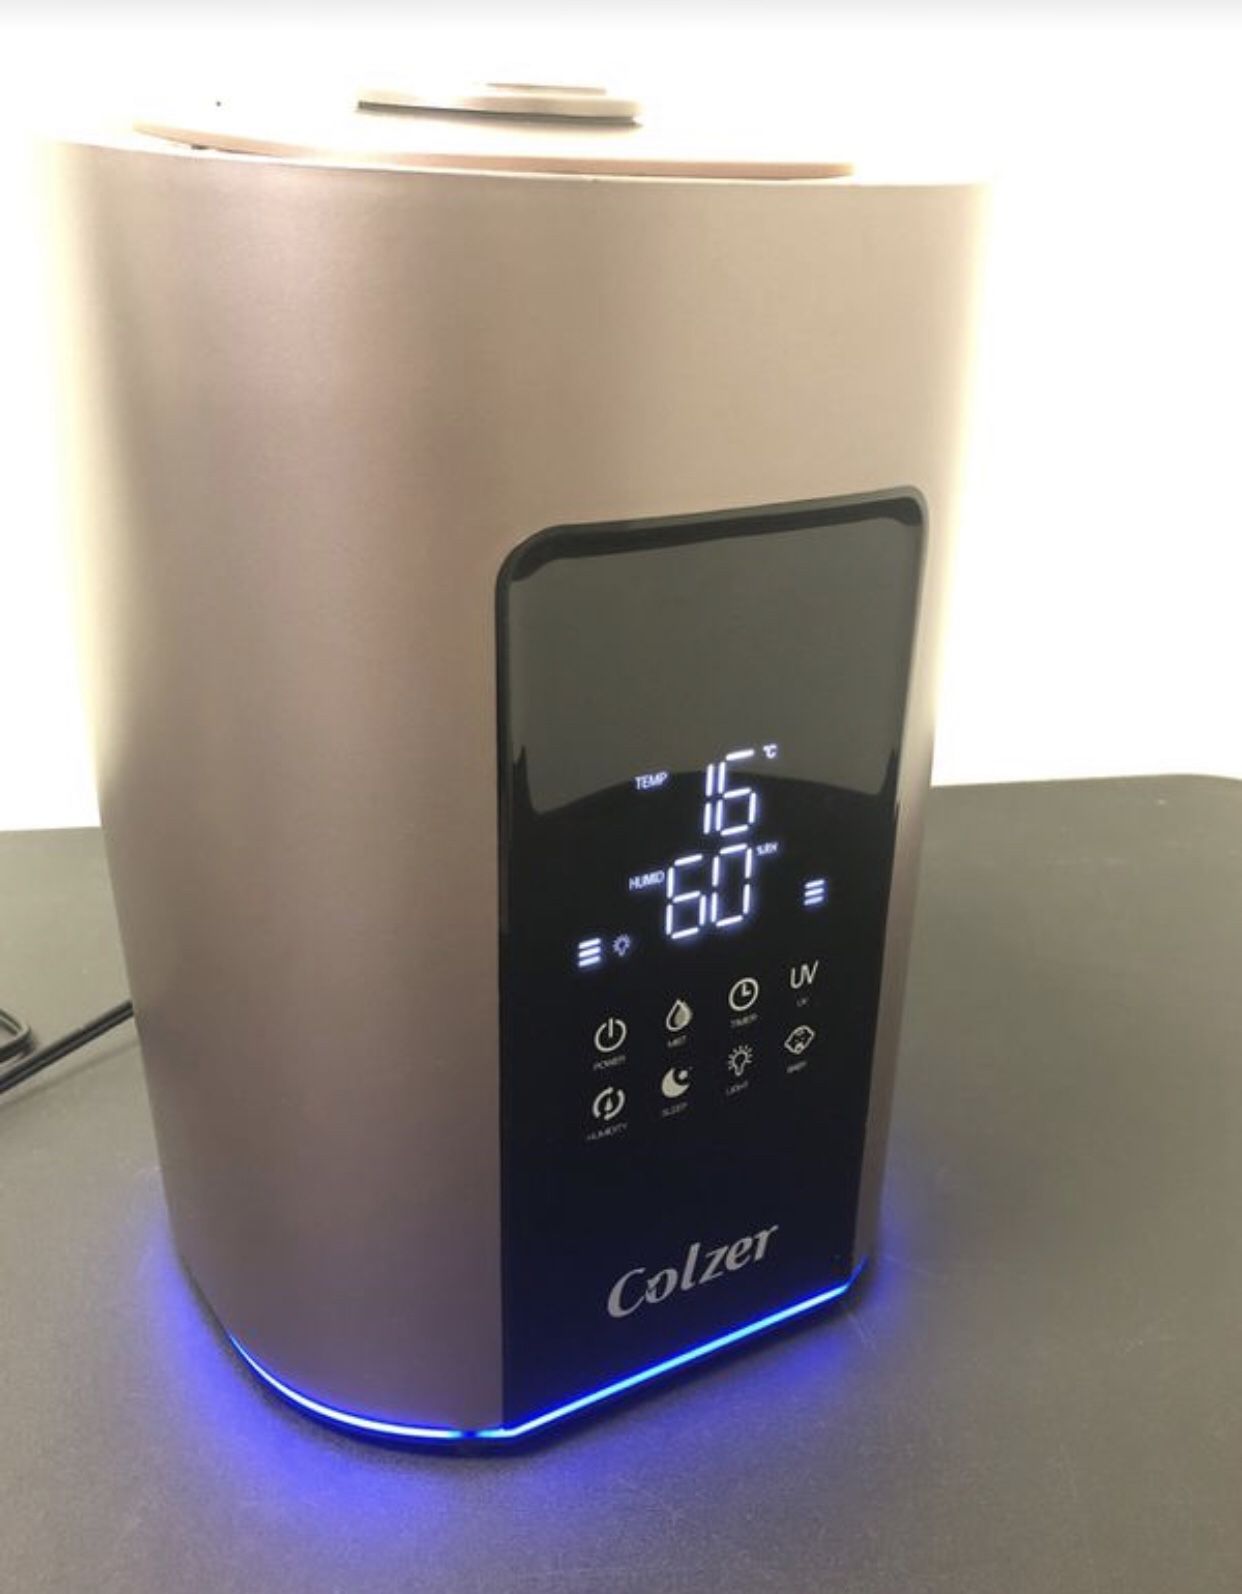 Colzer Air Humidifier